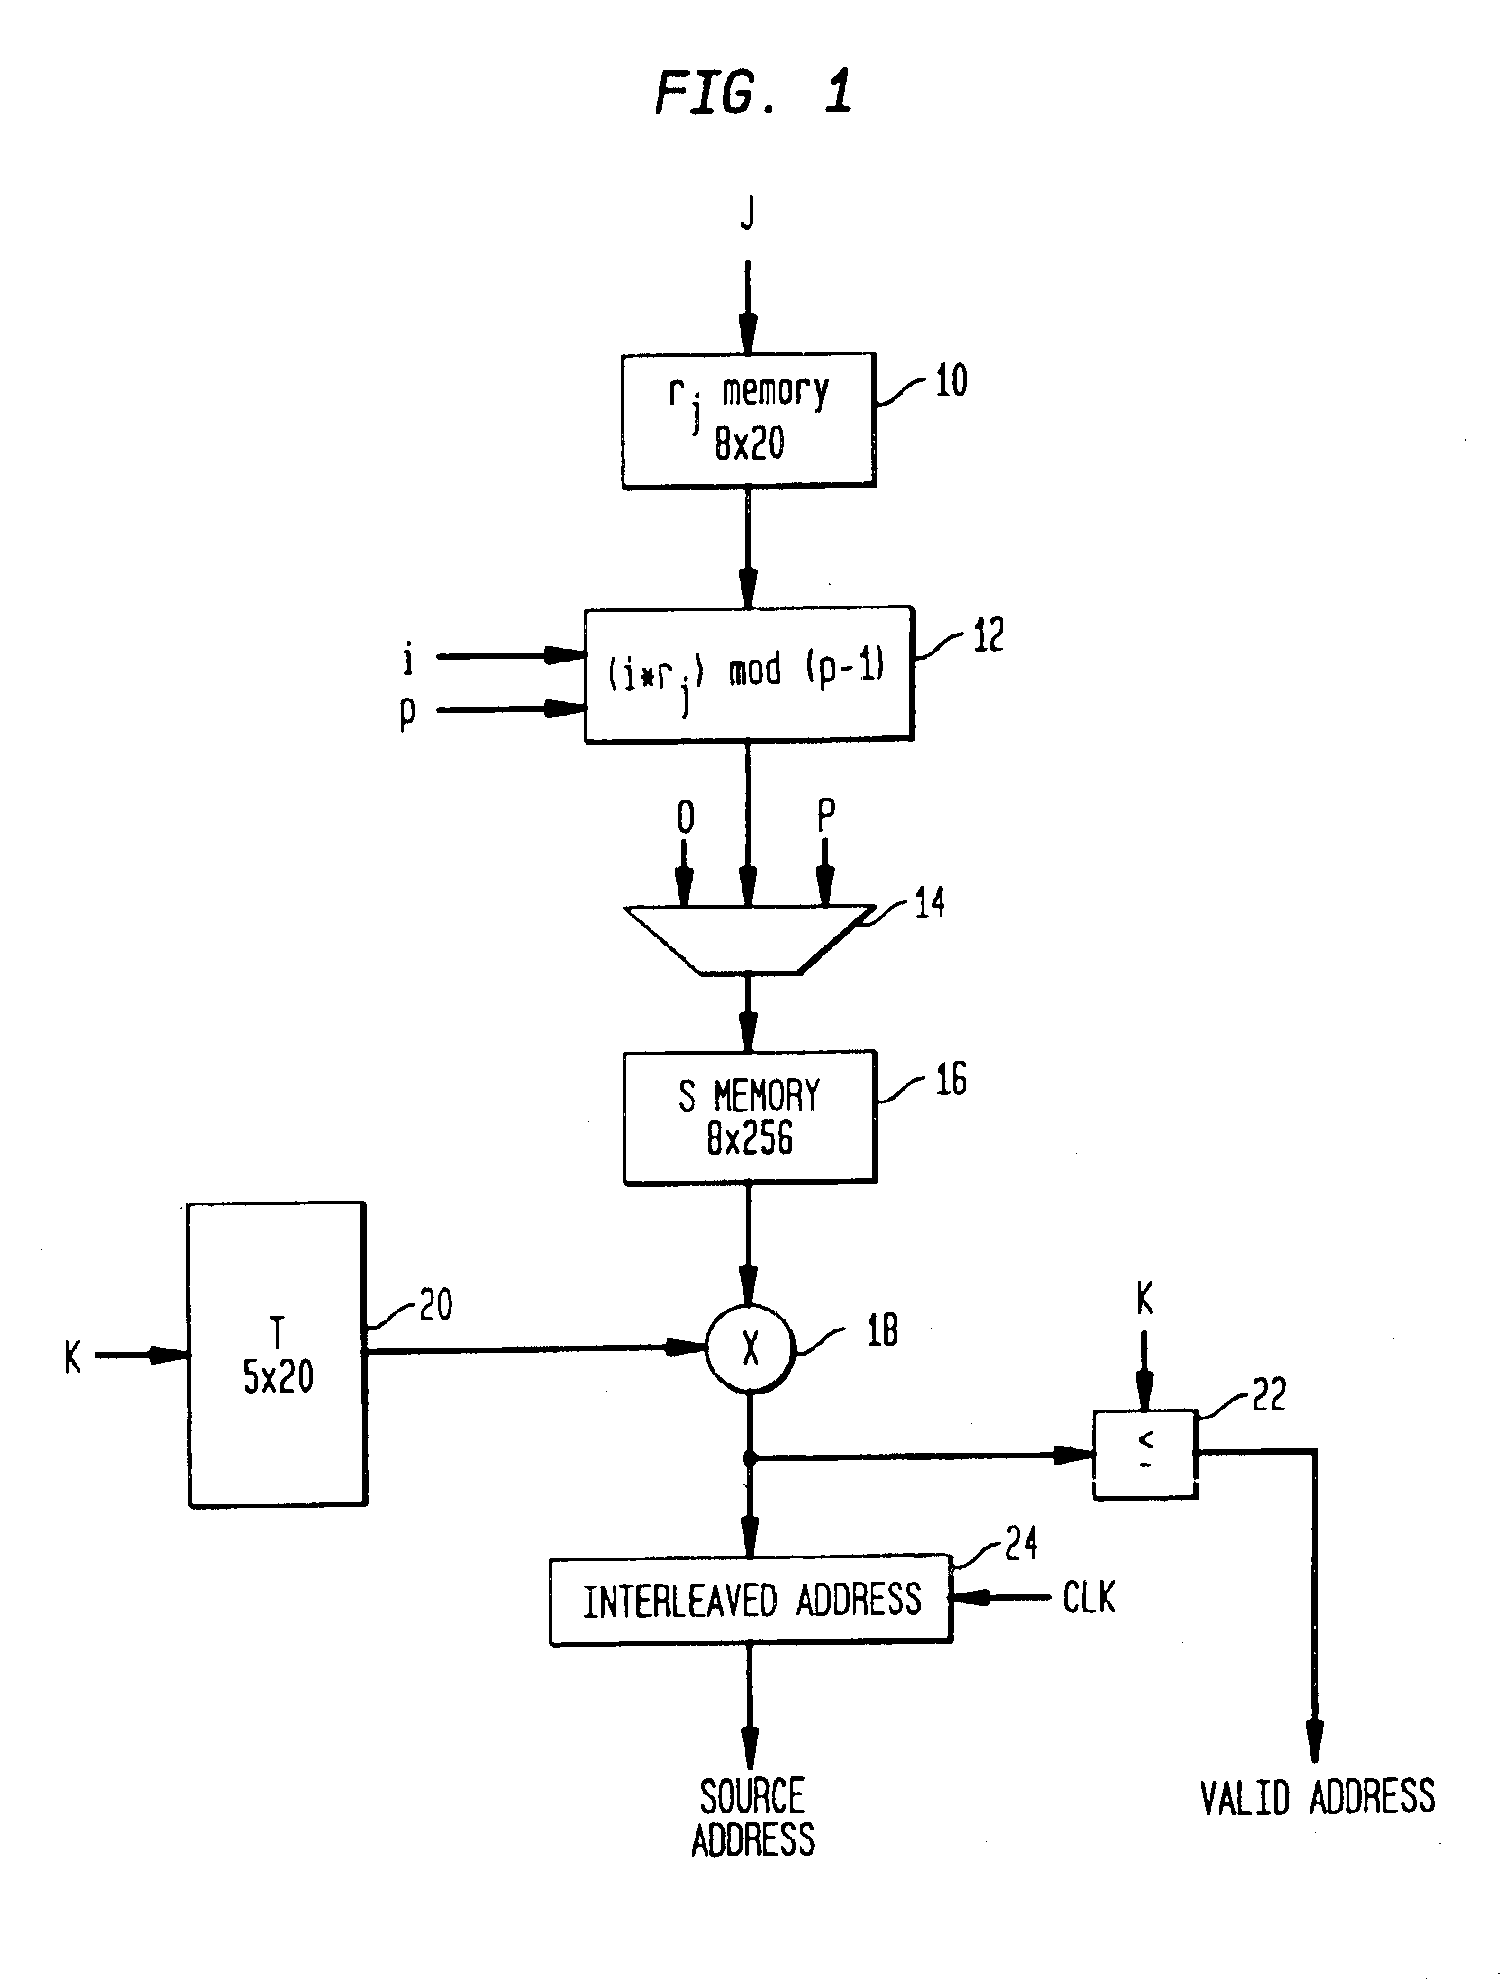 Method and apparatus for generating an interleaved address